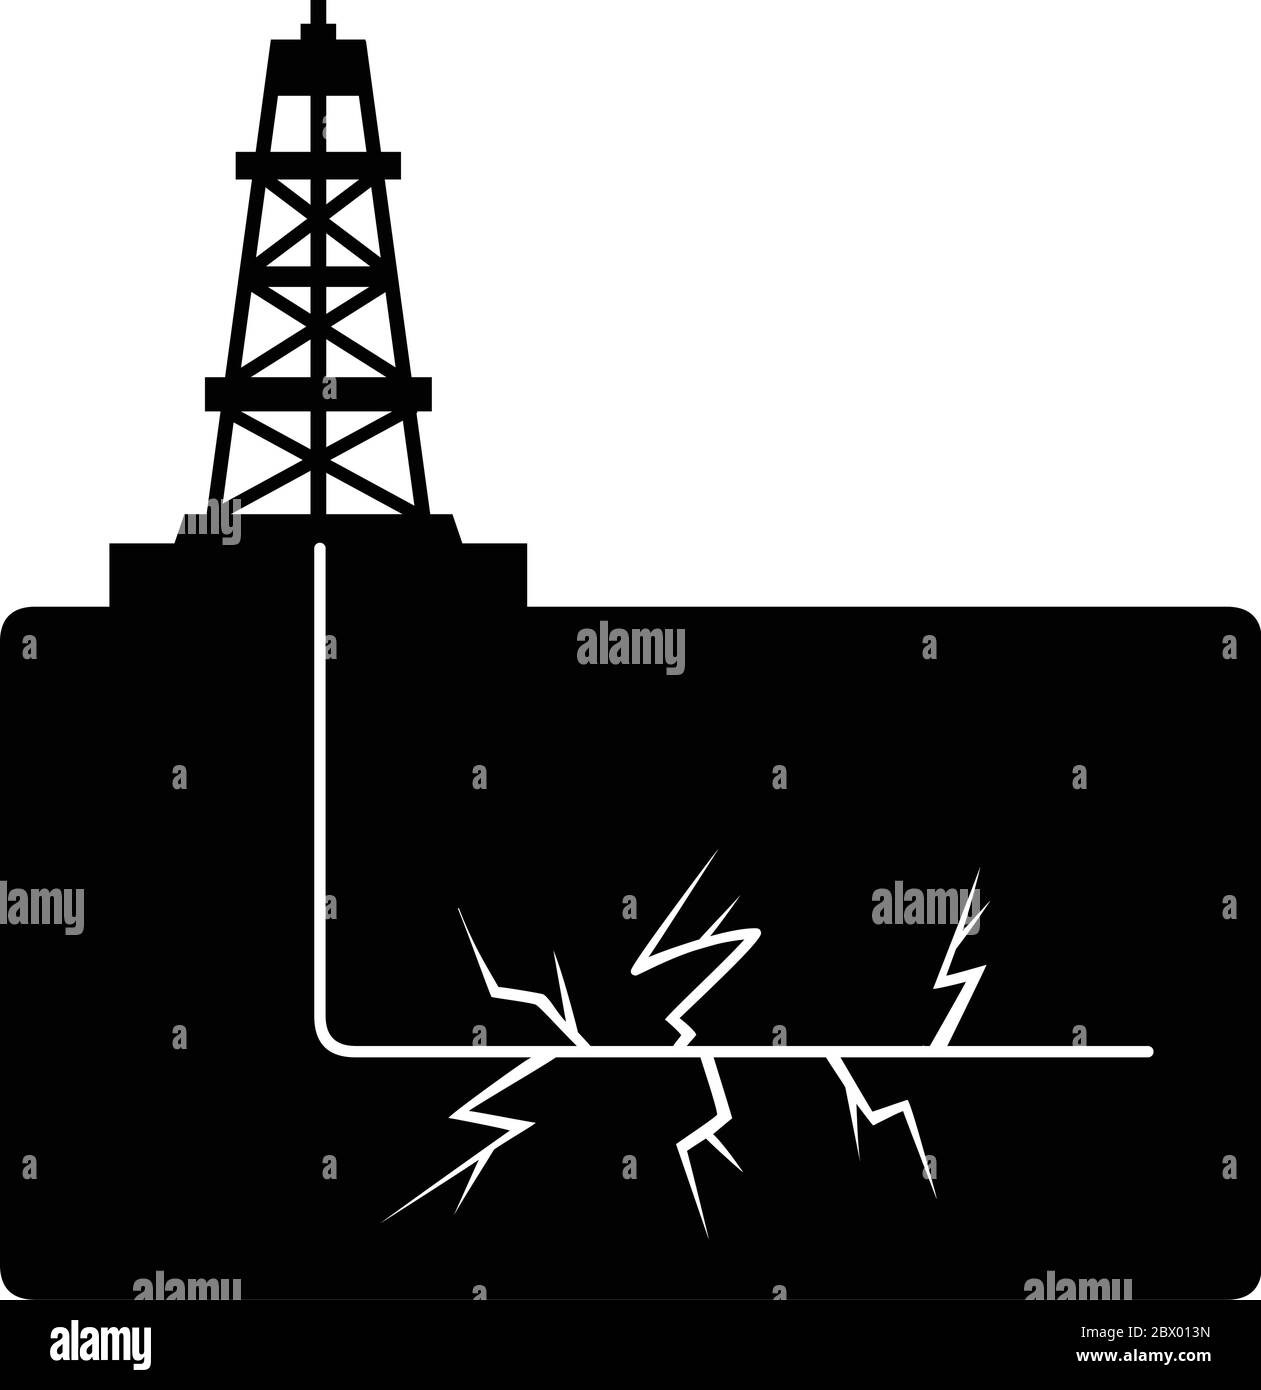 Hydraulic Fracturing- An Illustration of Hydraulic Fracturing. Stock Vector